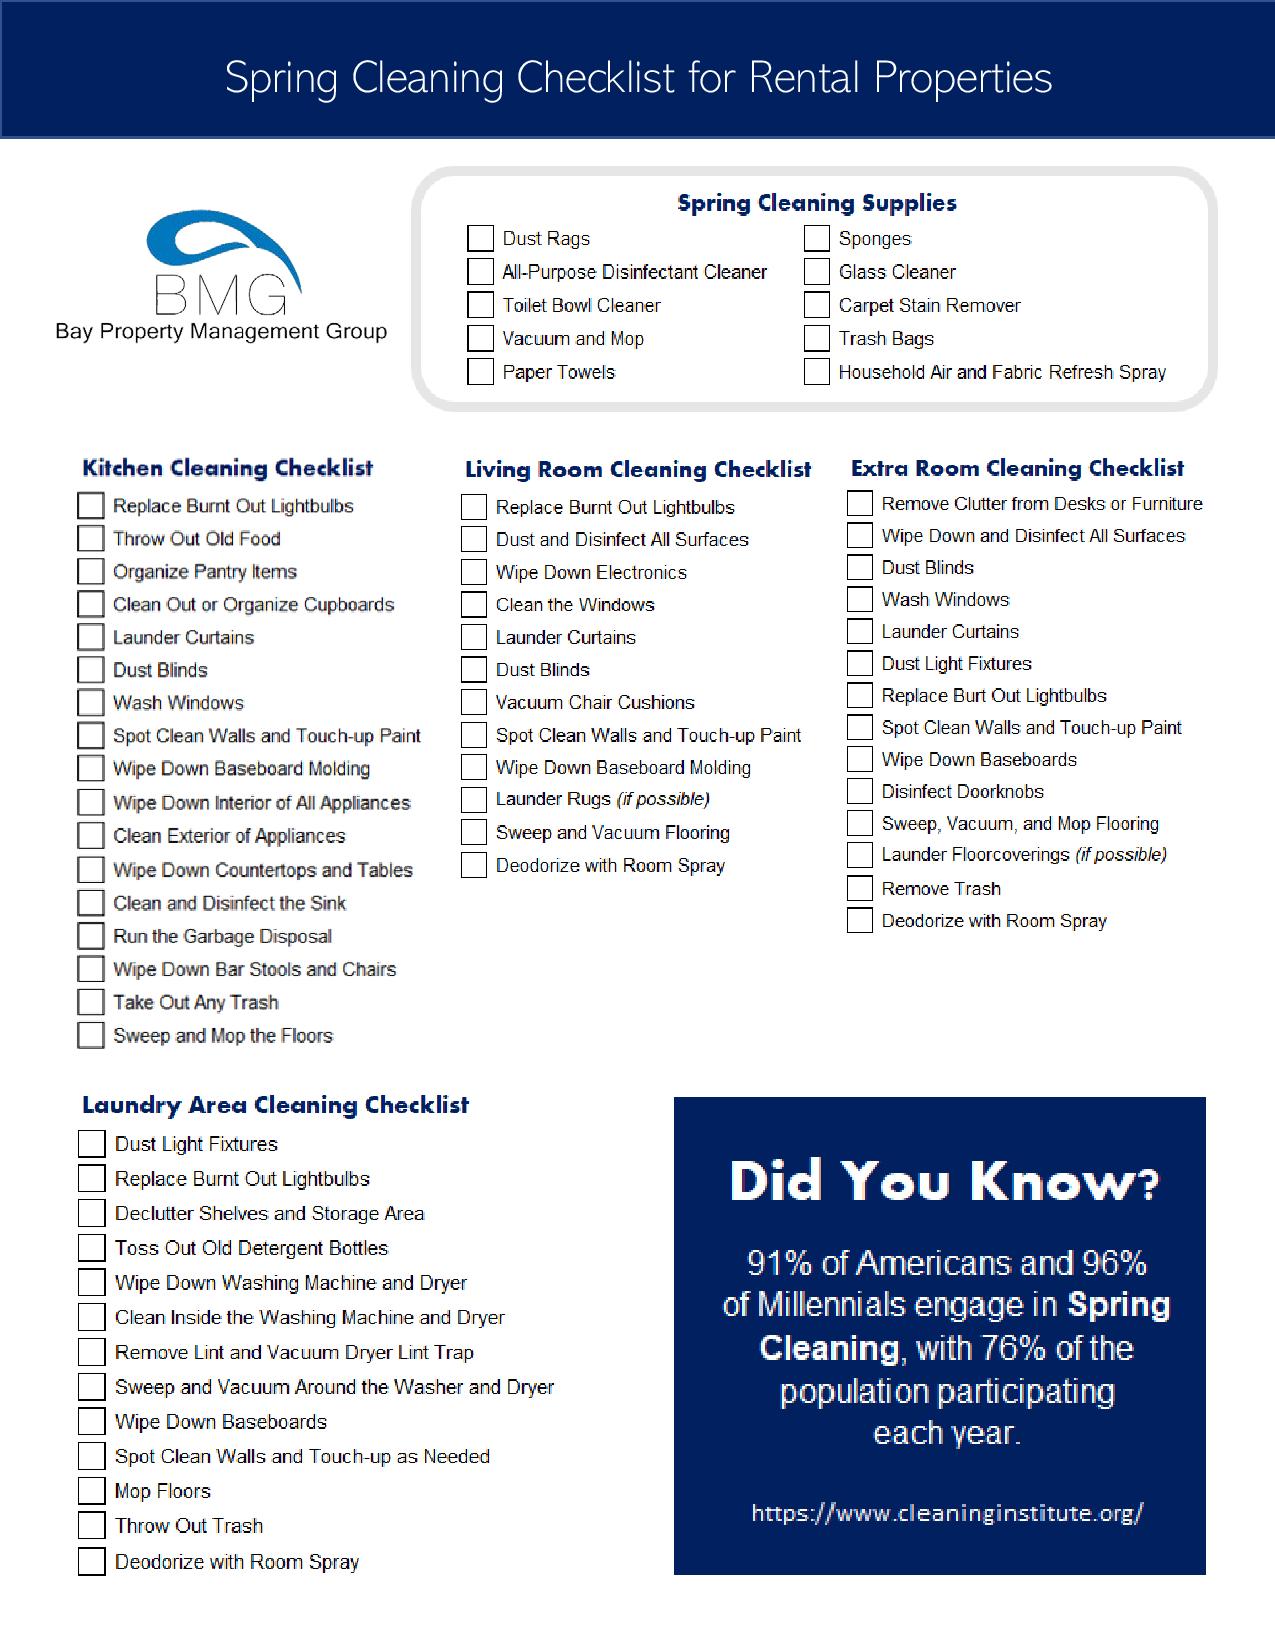 Apartment Cleaning Checklist - Keeping Your Rental Clean